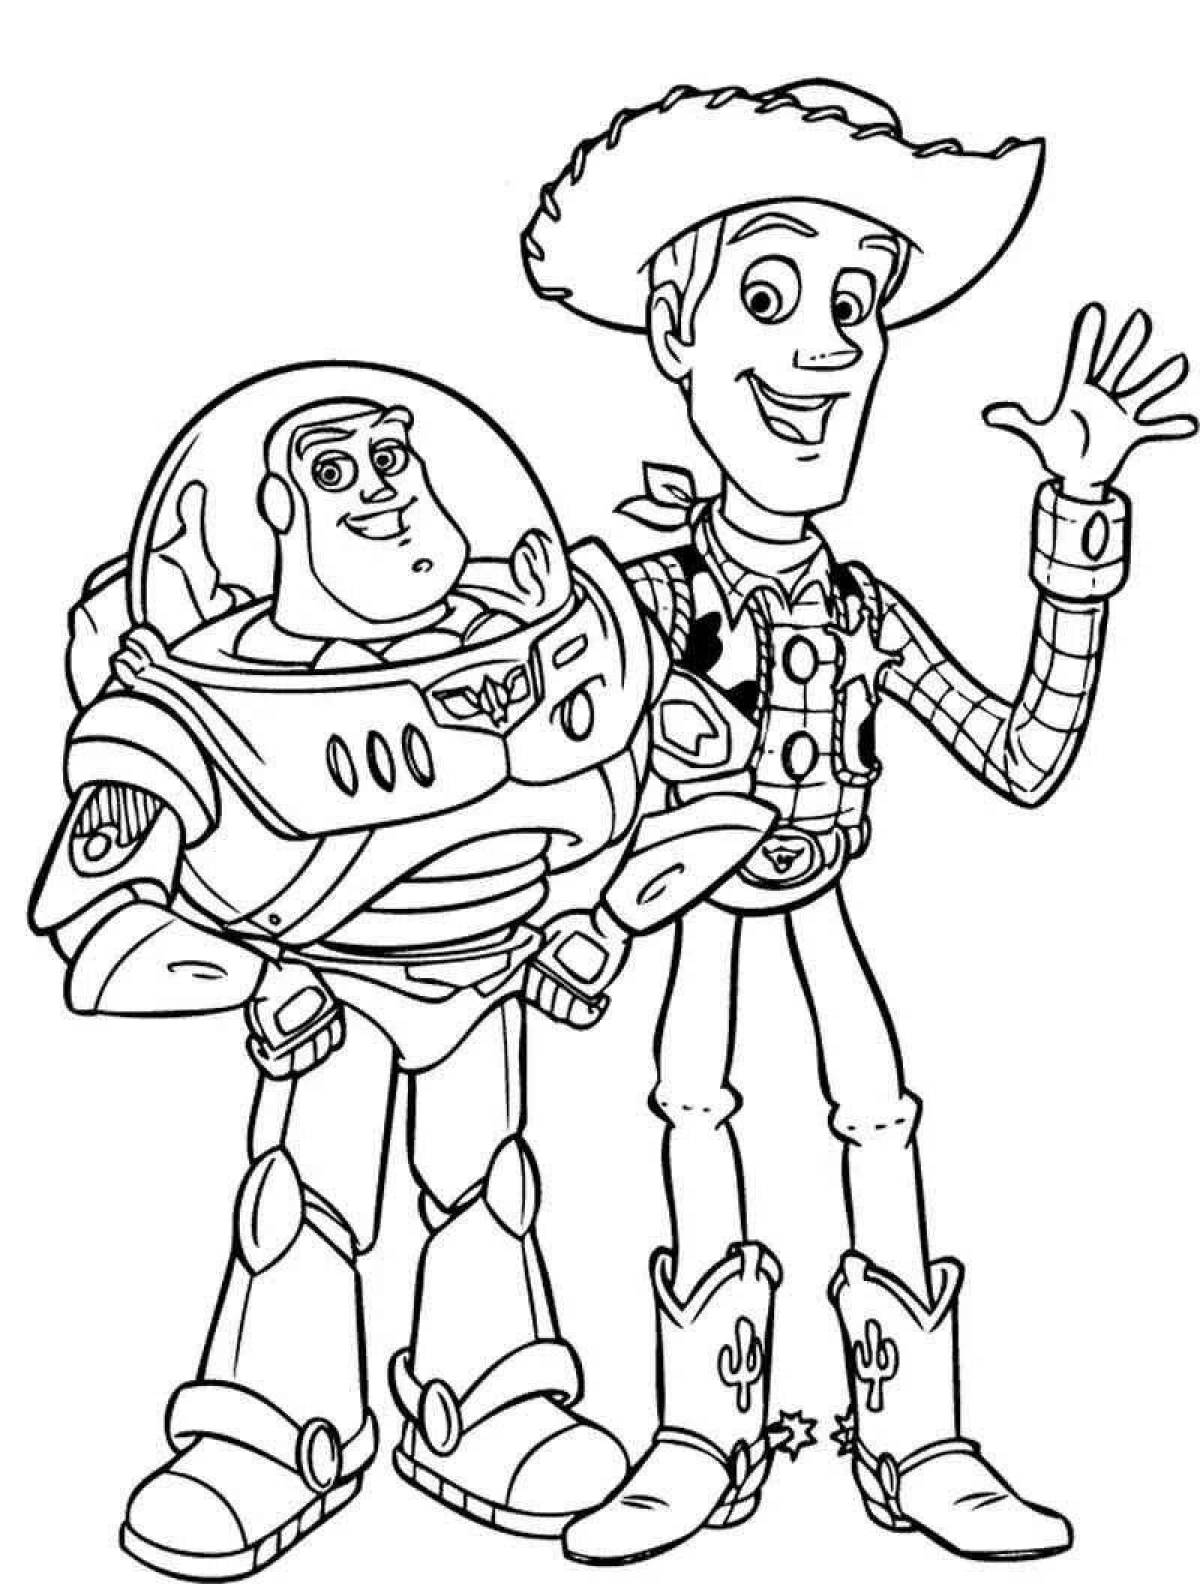 Toy Story comedy woody